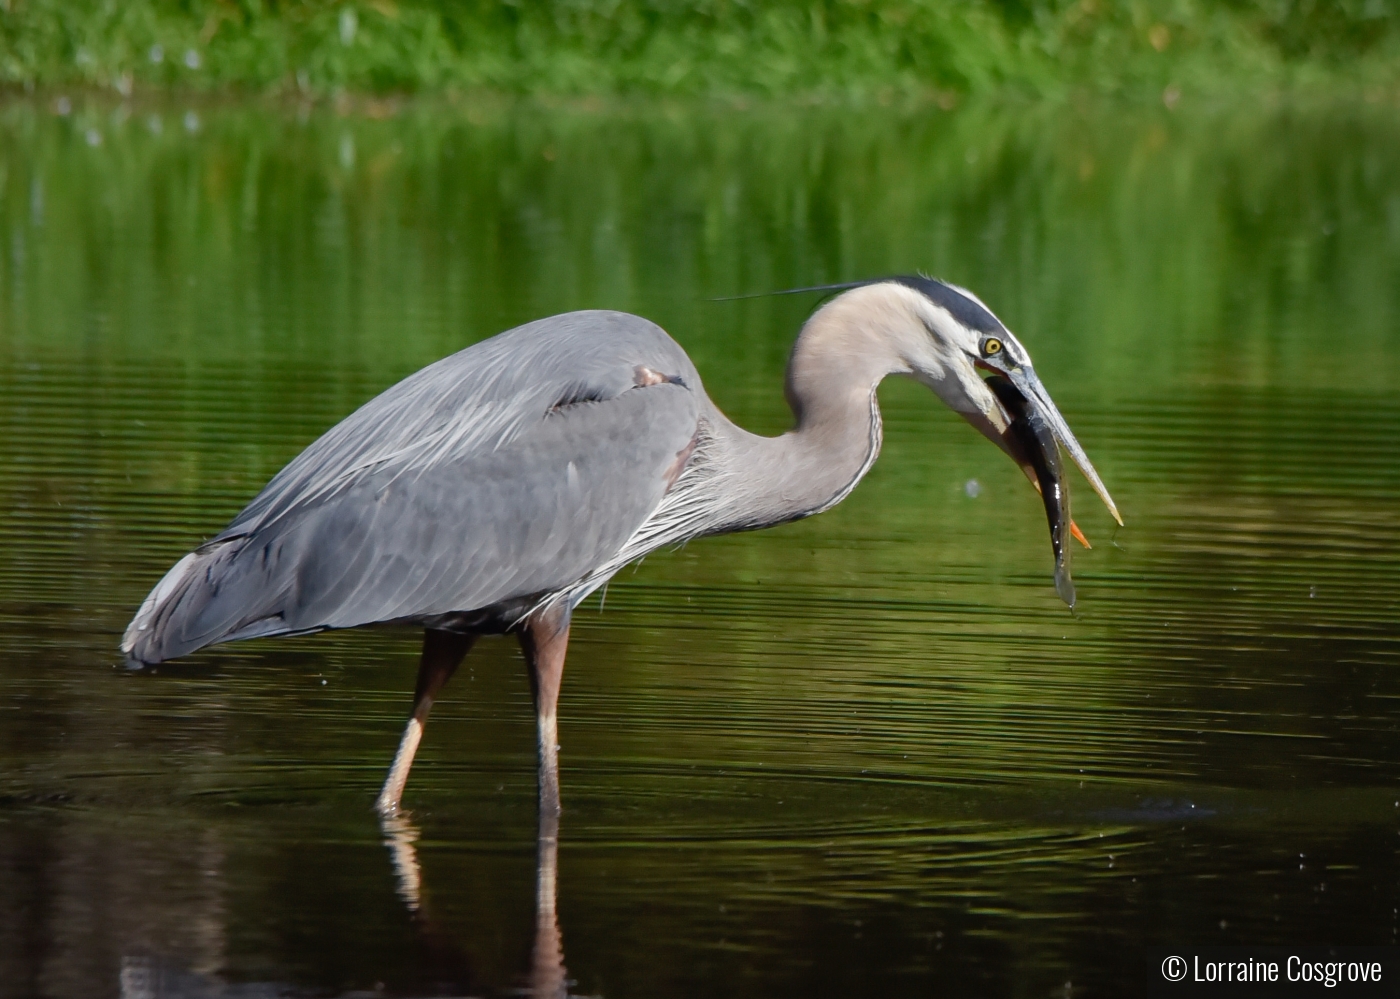 Blue Heron With a Trout by Lorraine Cosgrove